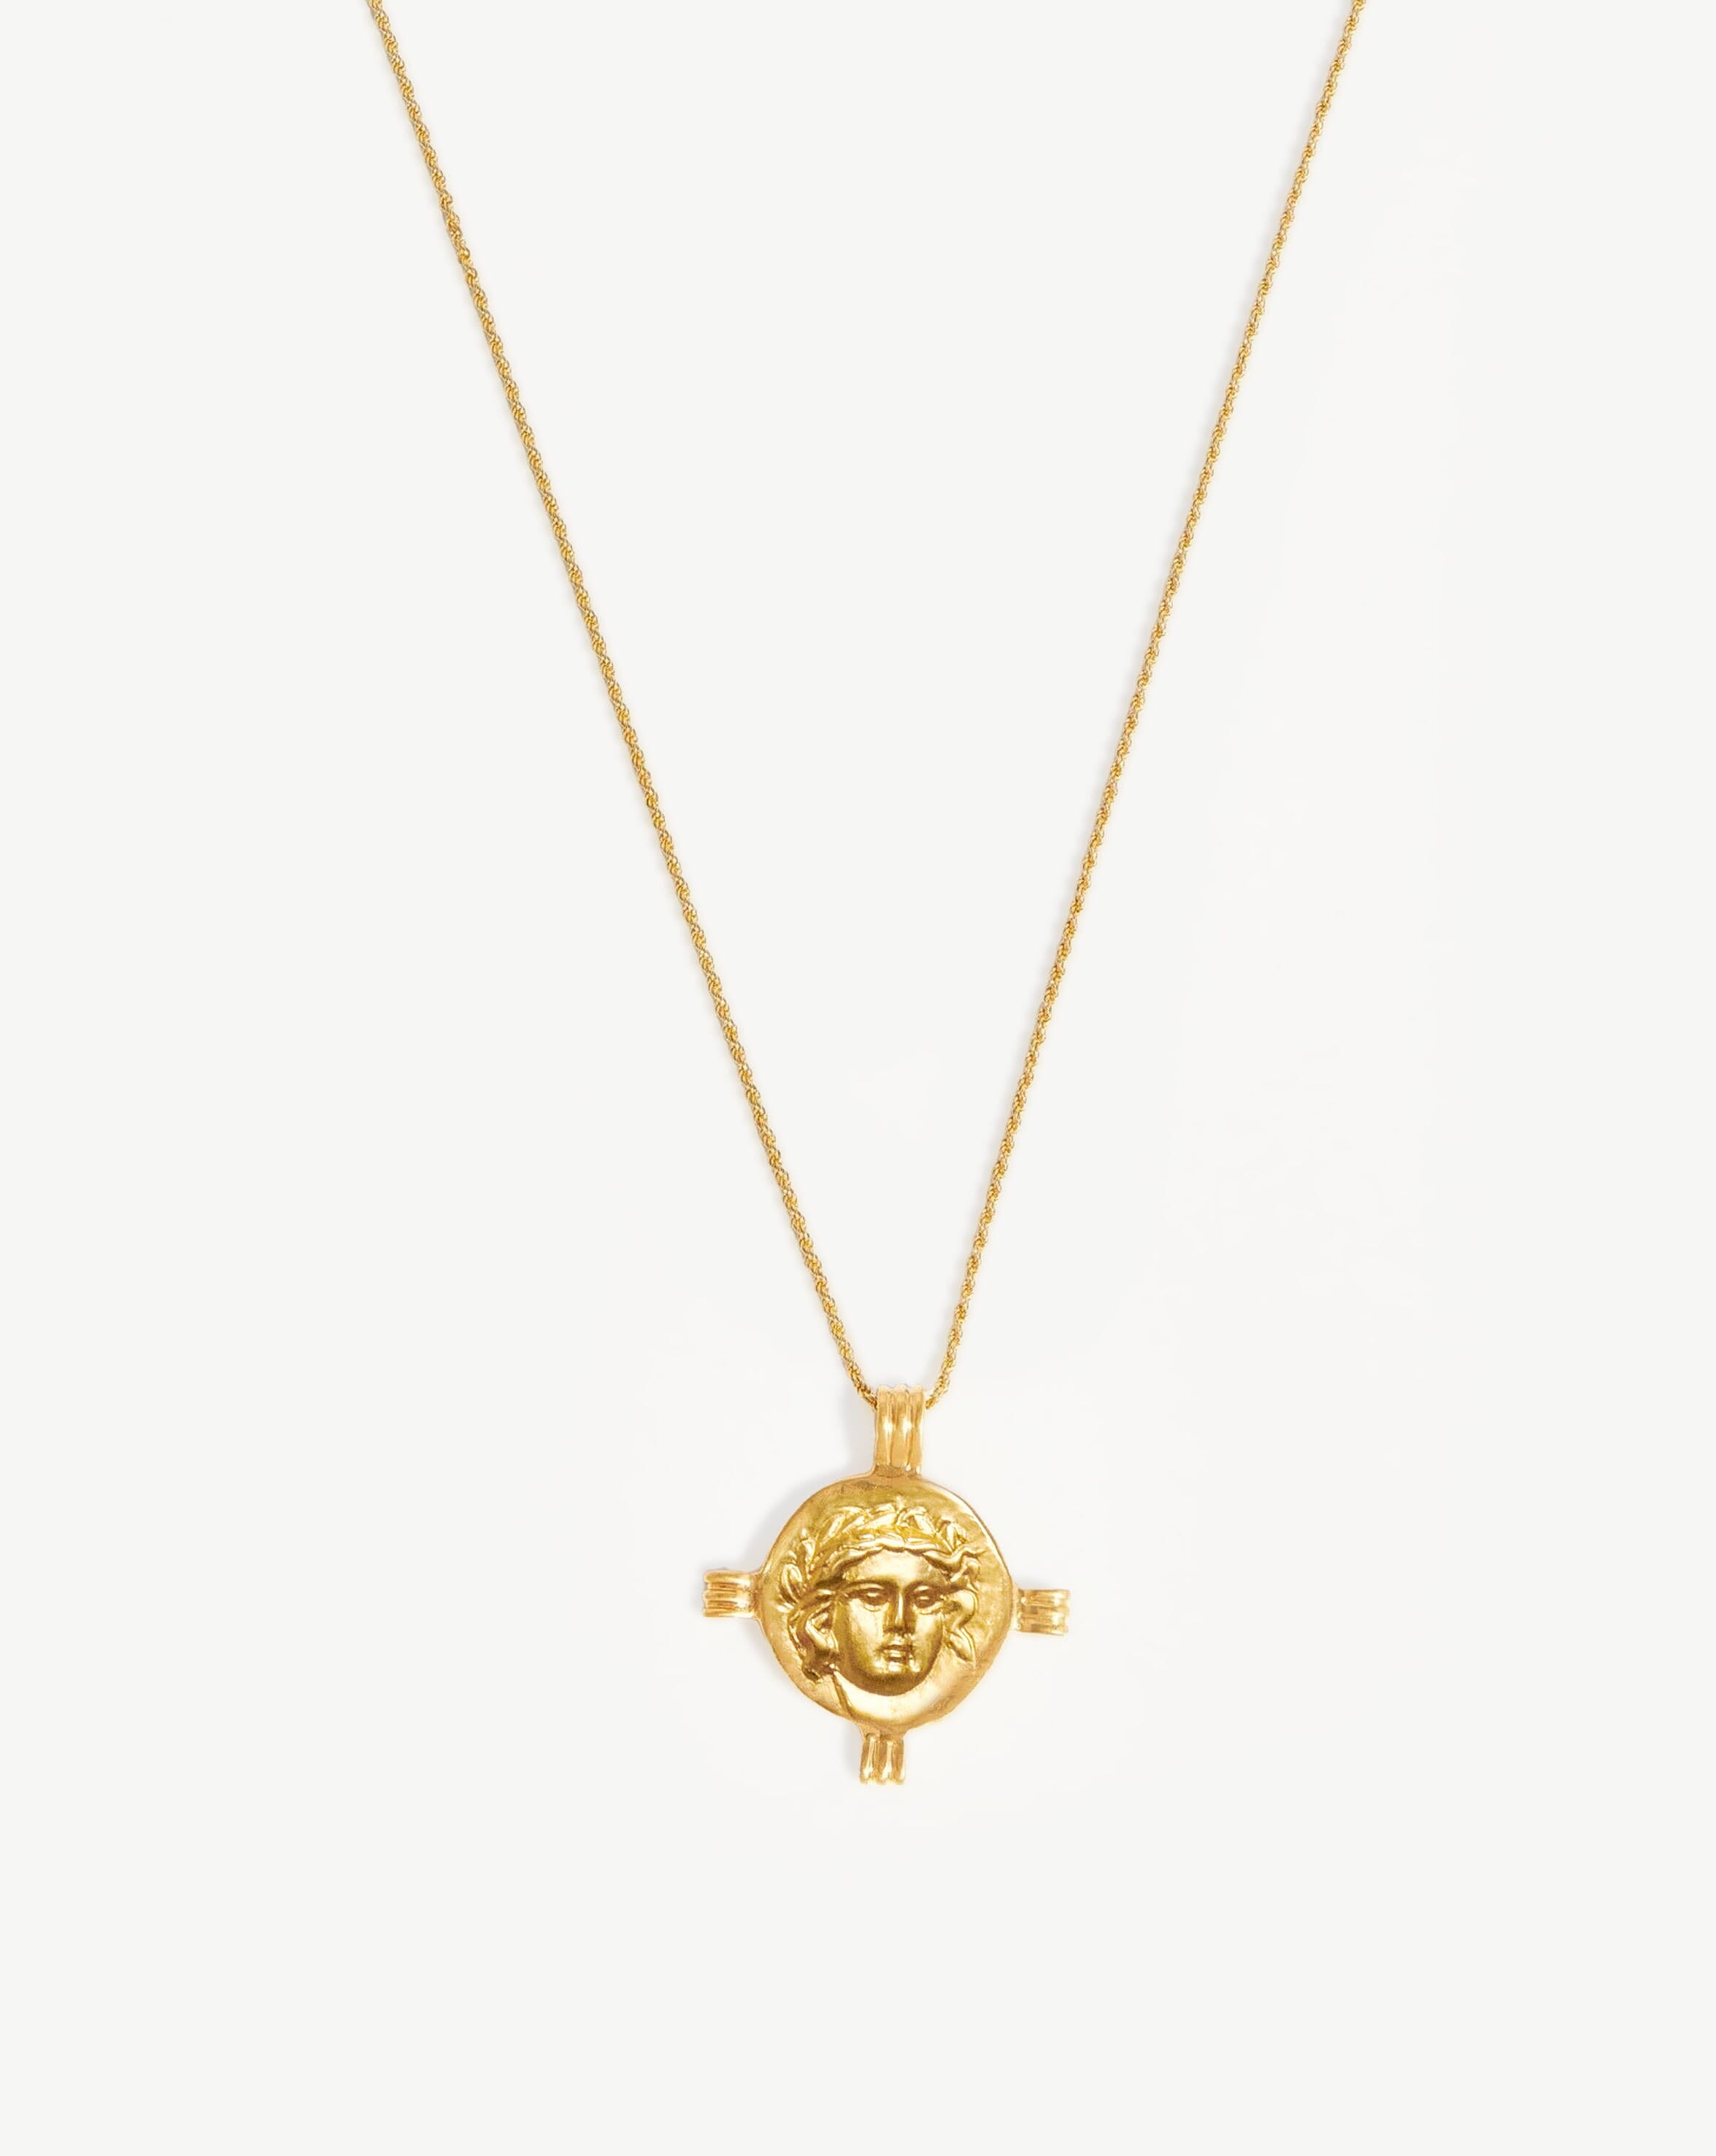 Lucy Williams Apollo Medallion Coin Necklace, 18ct Gold Plated